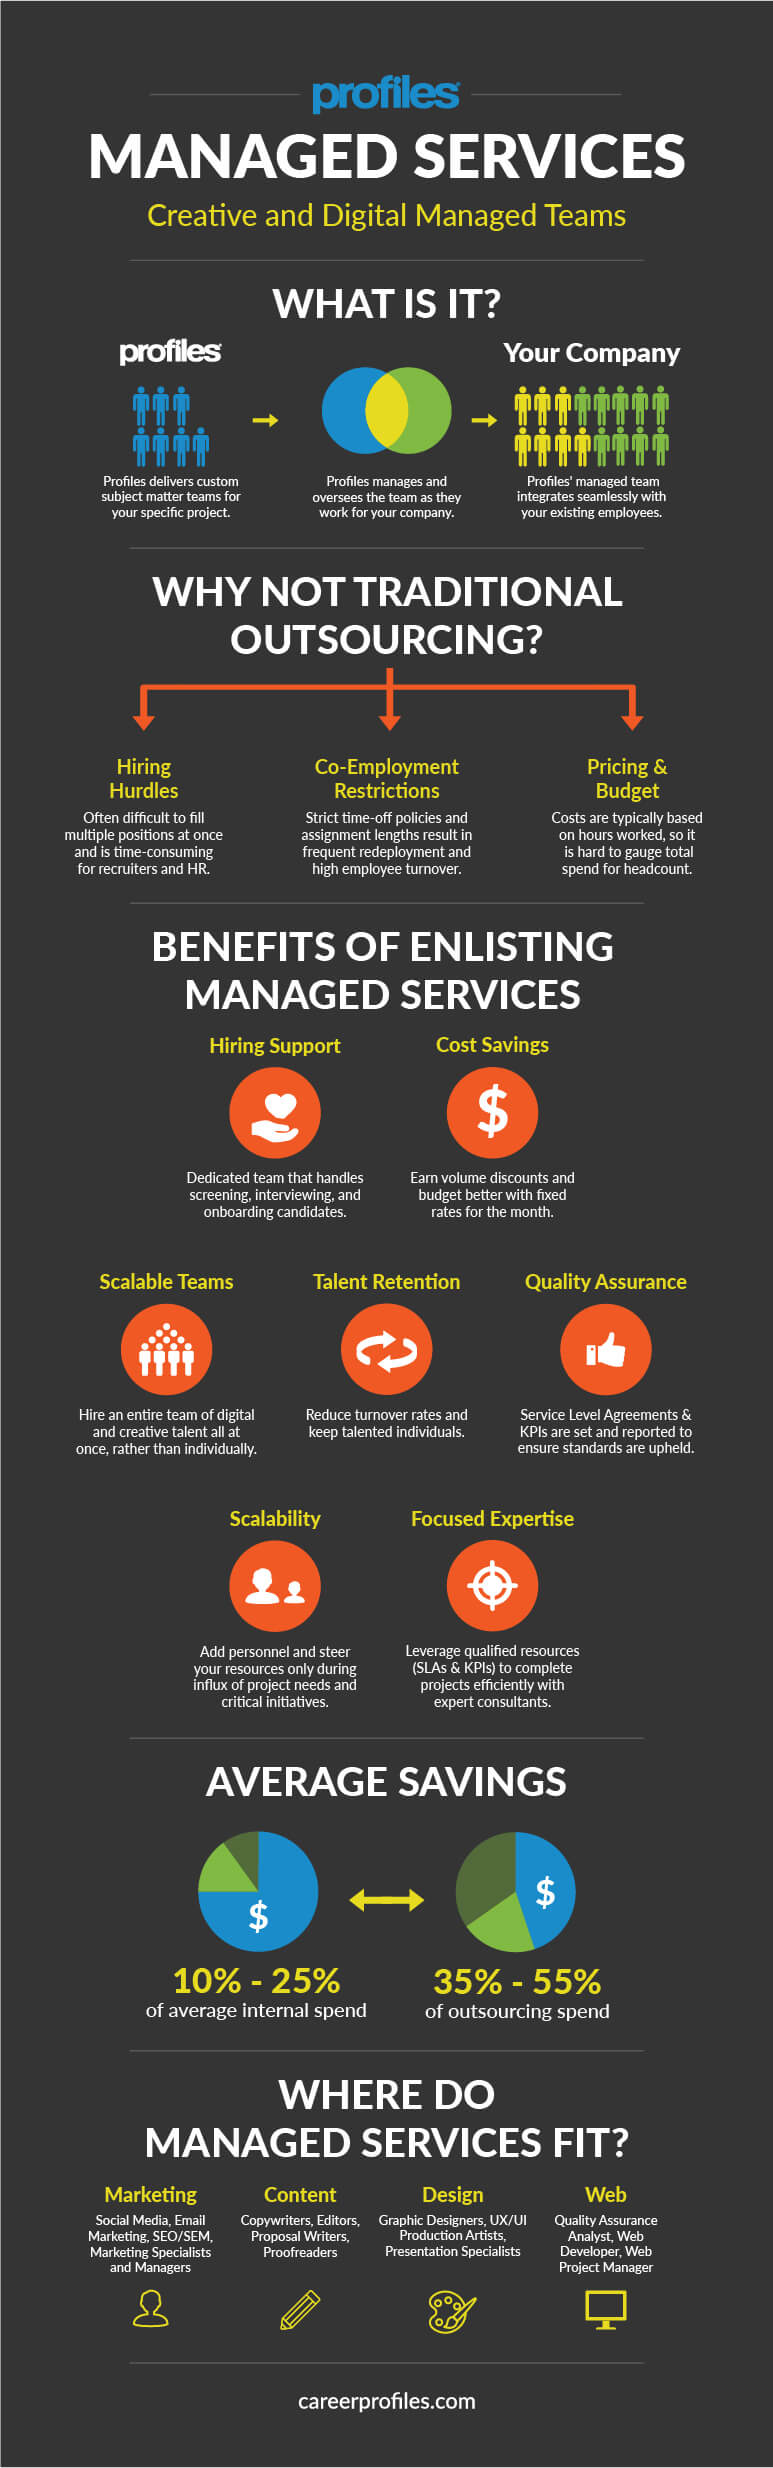 profiles managed services infographic